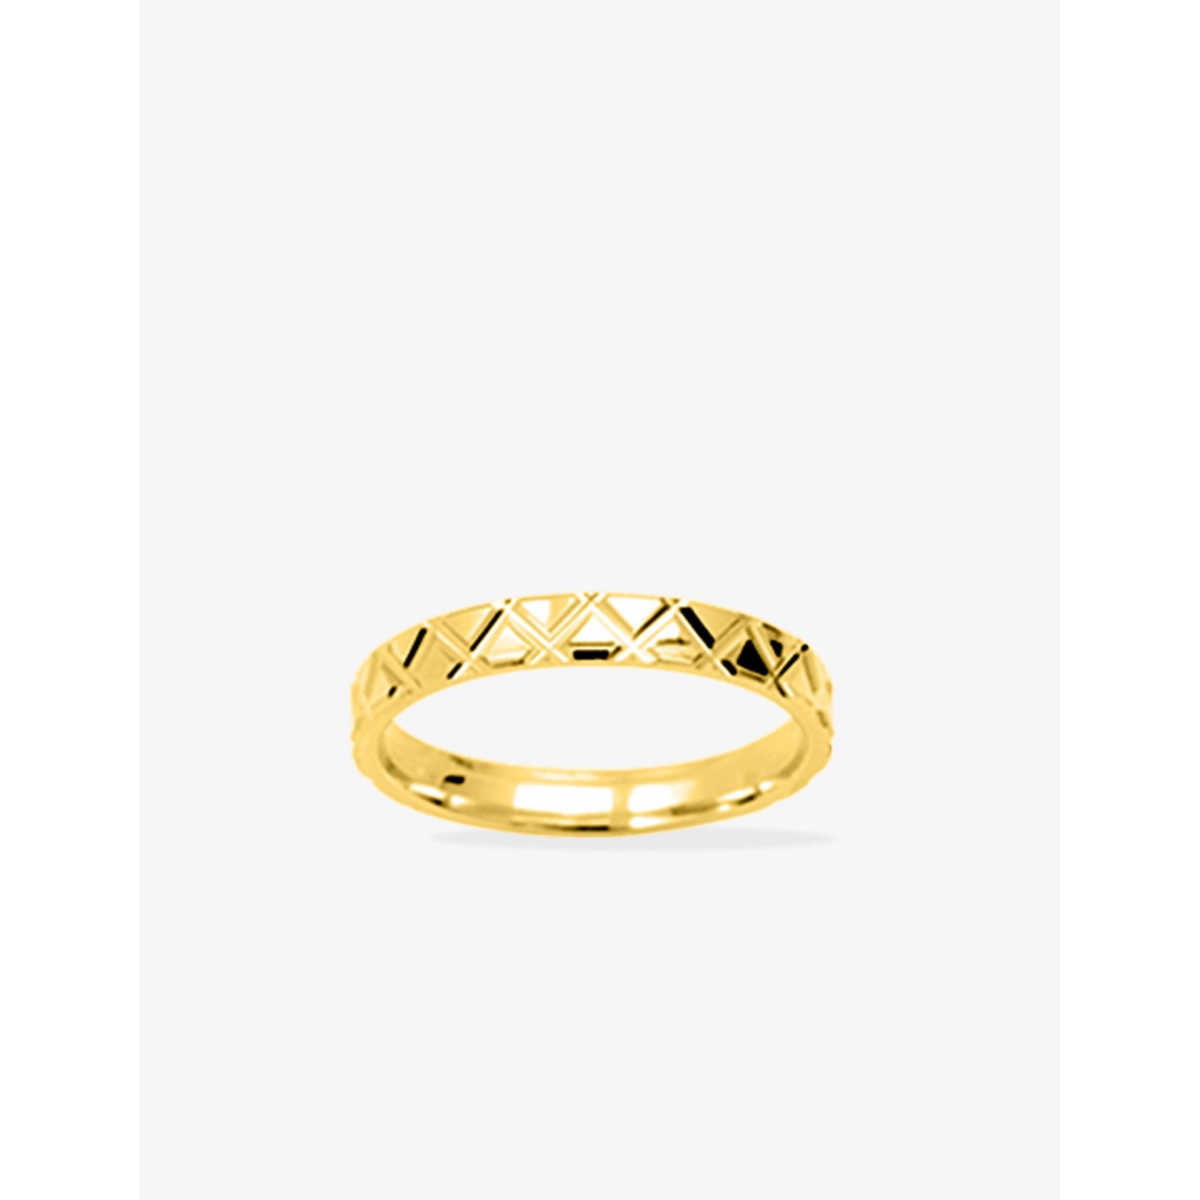 Wedding ring gold plated Brass Lua Blanca  250956 - Size 54